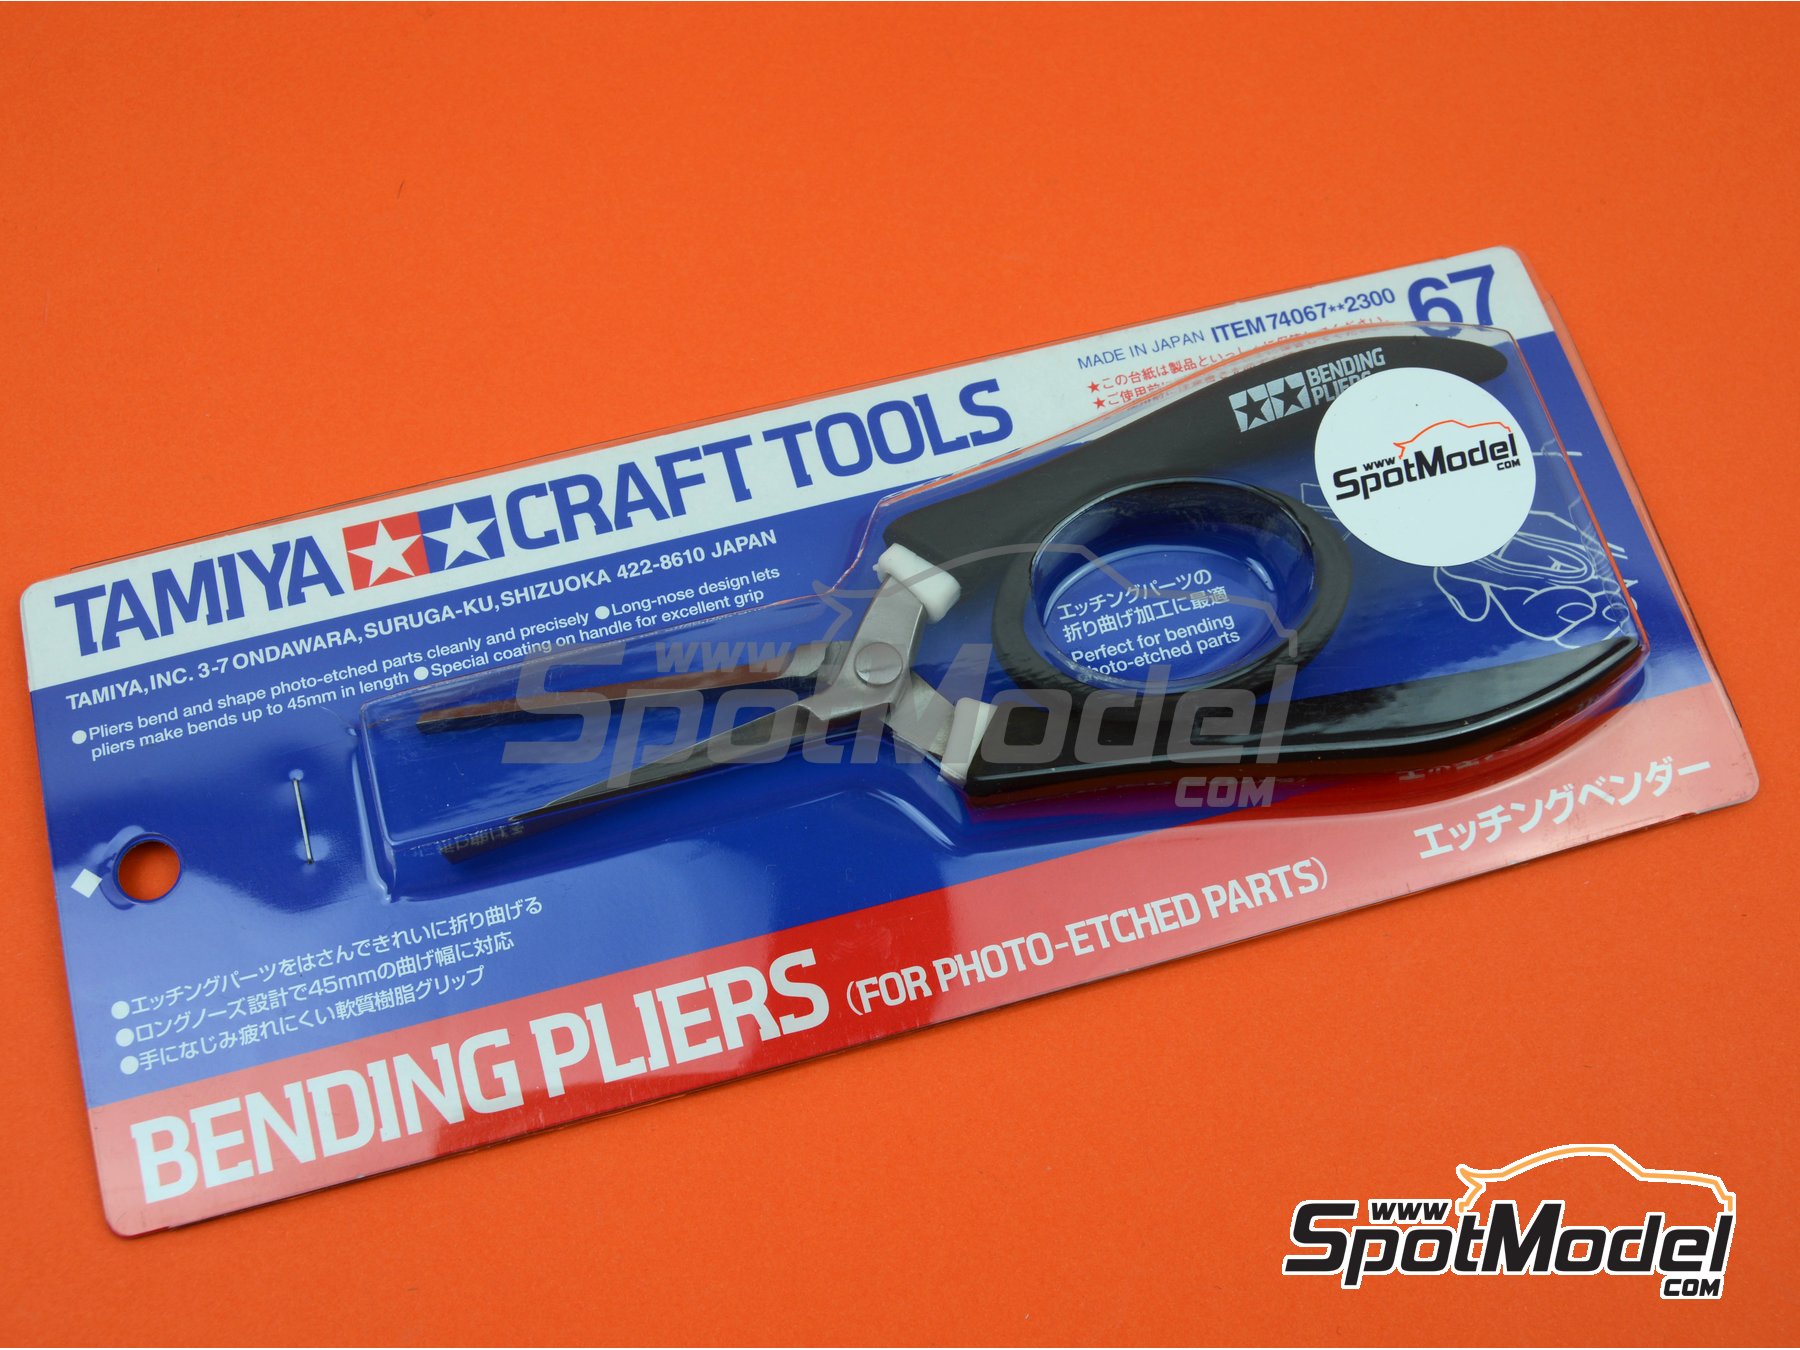 Bending Pliers Mini for Photo Etched Parts for sale online Tamiya 74084 Craft Tools 